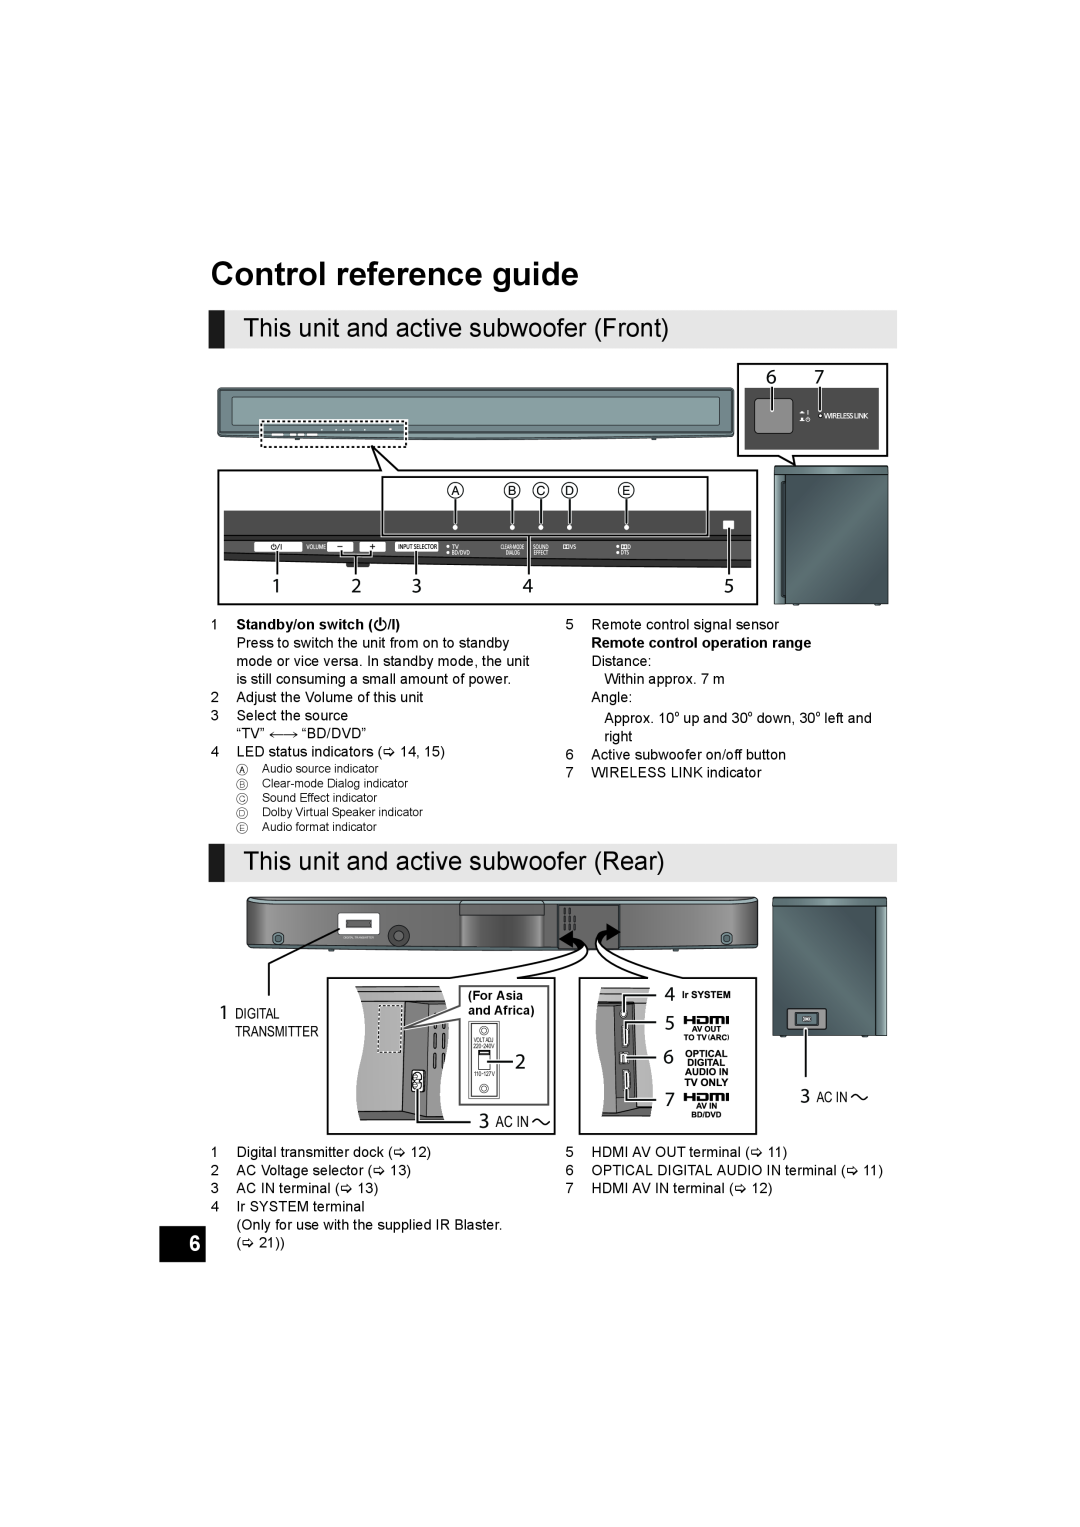 Panasonic SC-HTB500 Control reference guide, This unit and active subwoofer Front, This unit and active subwoofer Rear 